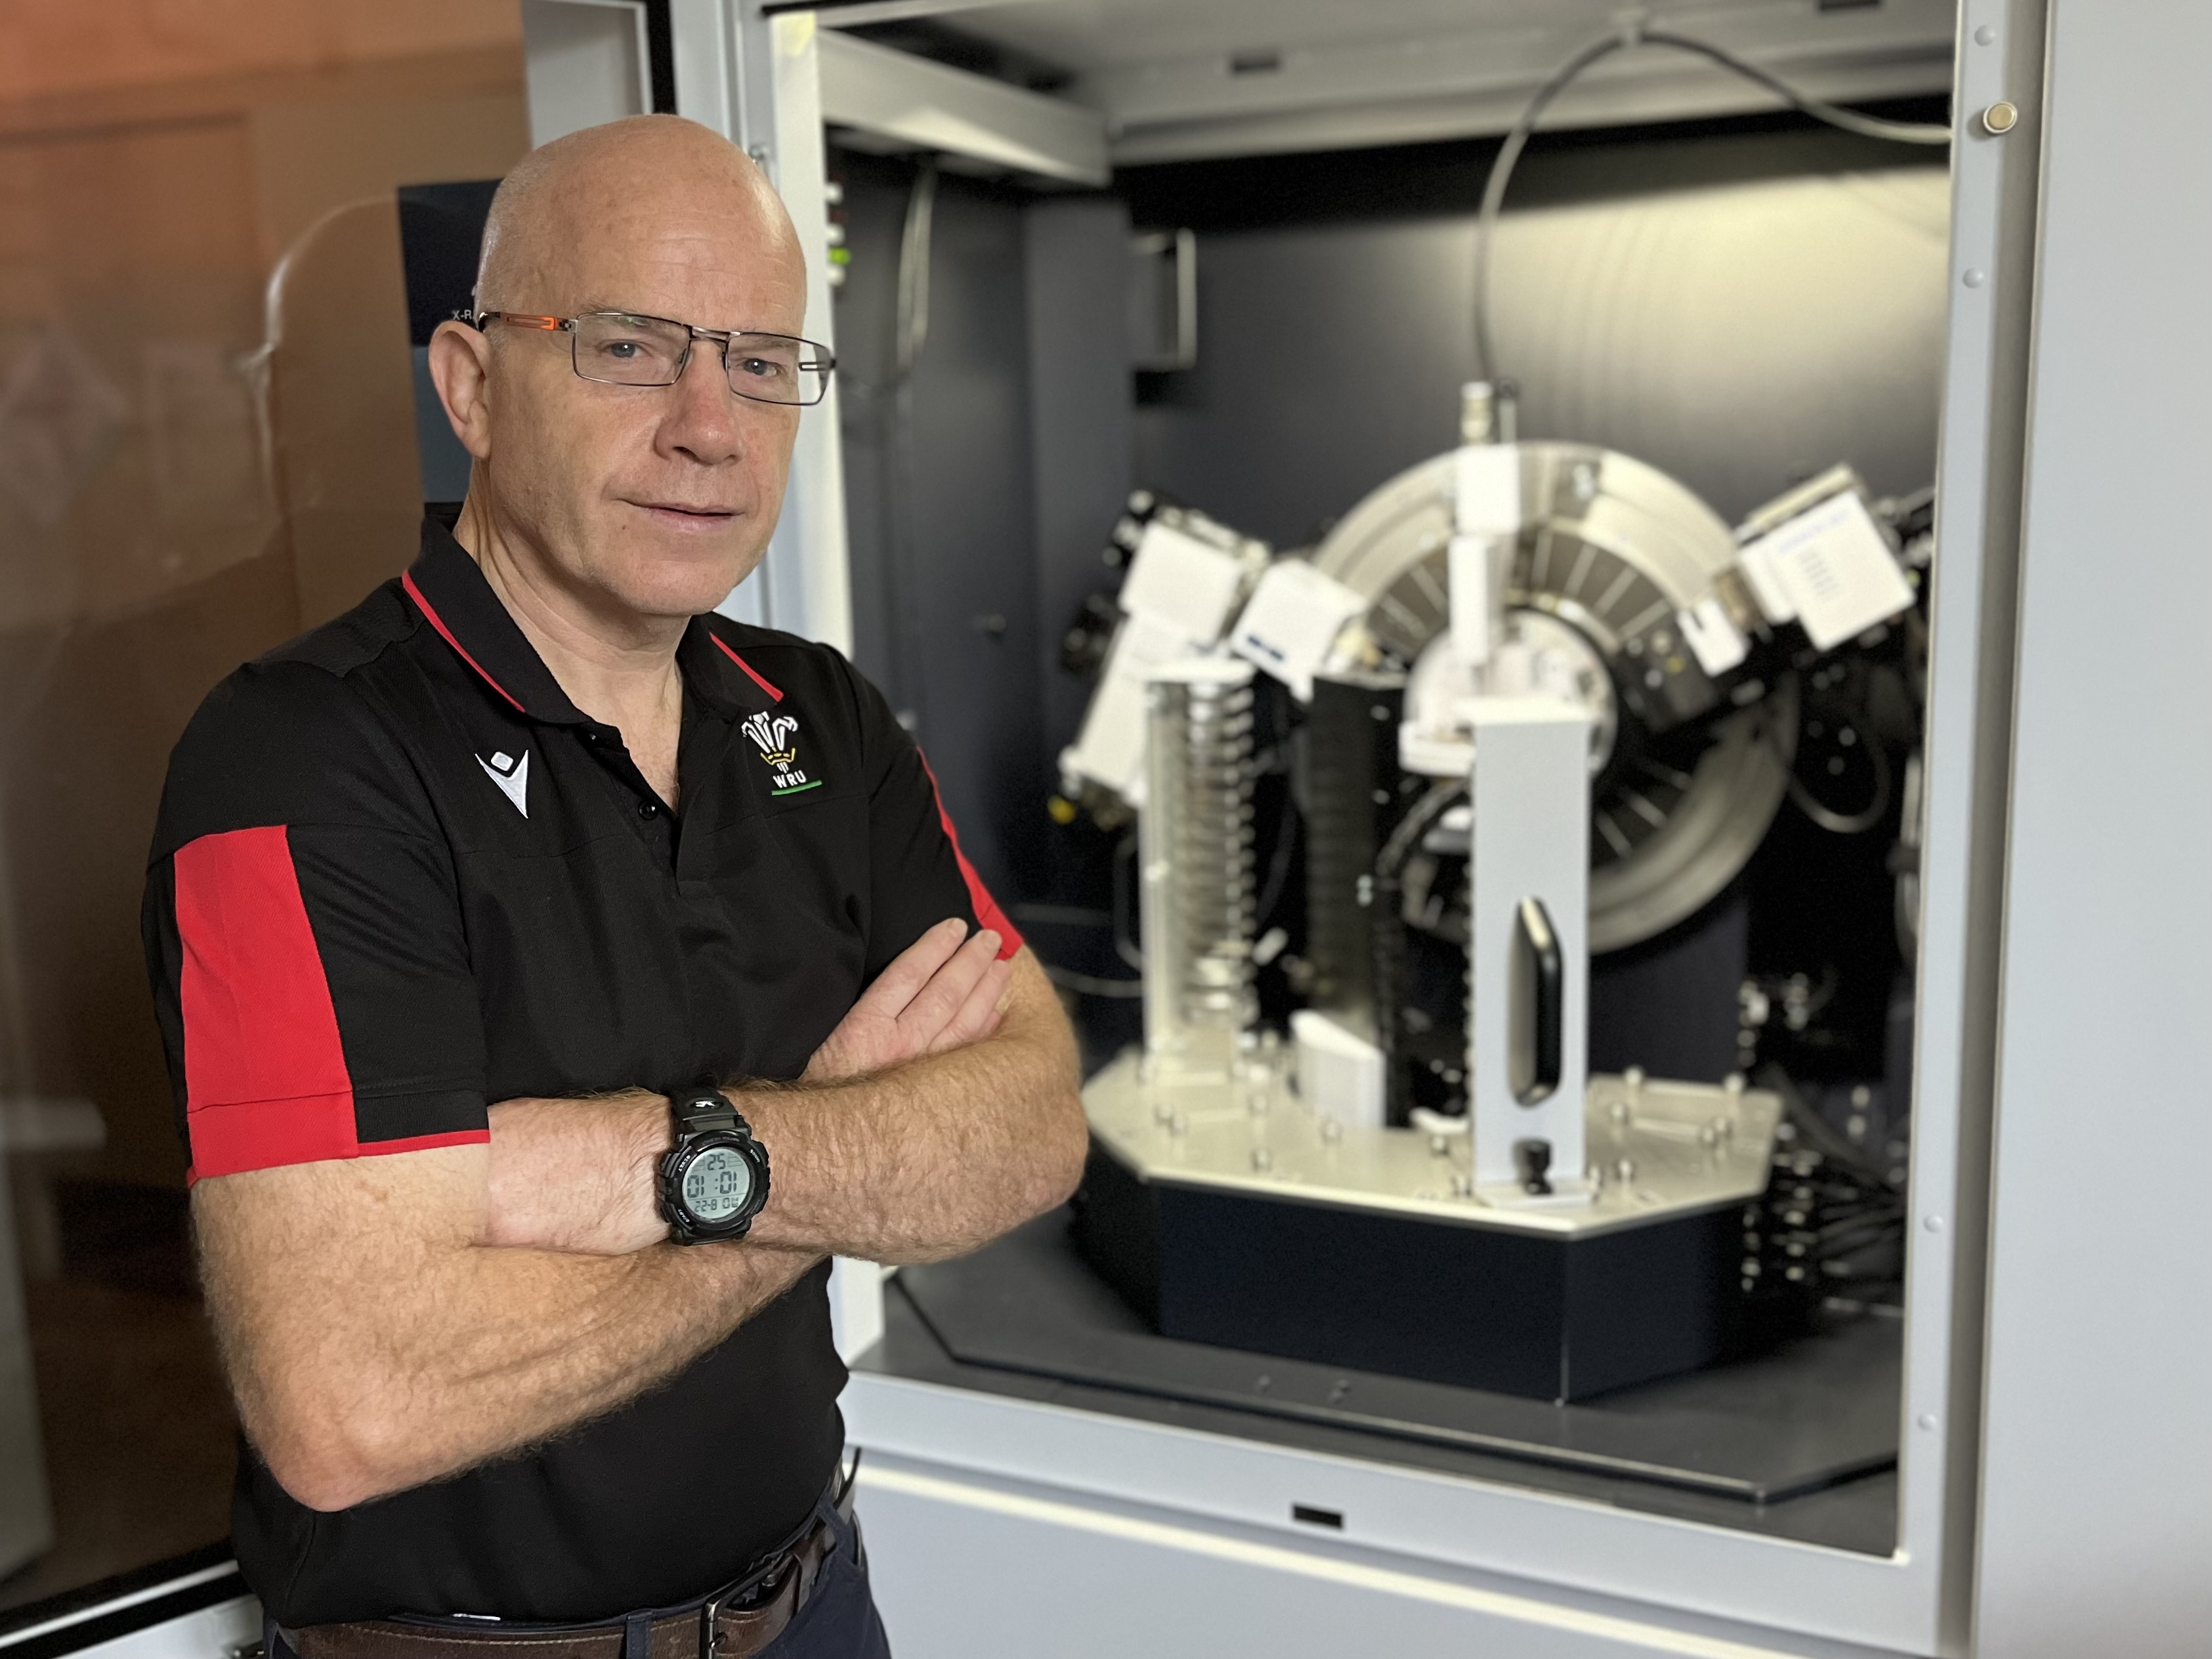 Professor Steve Hiller, who leads the globally leading mineralogy department at The James Hutton Institute, and the new XRD machine.